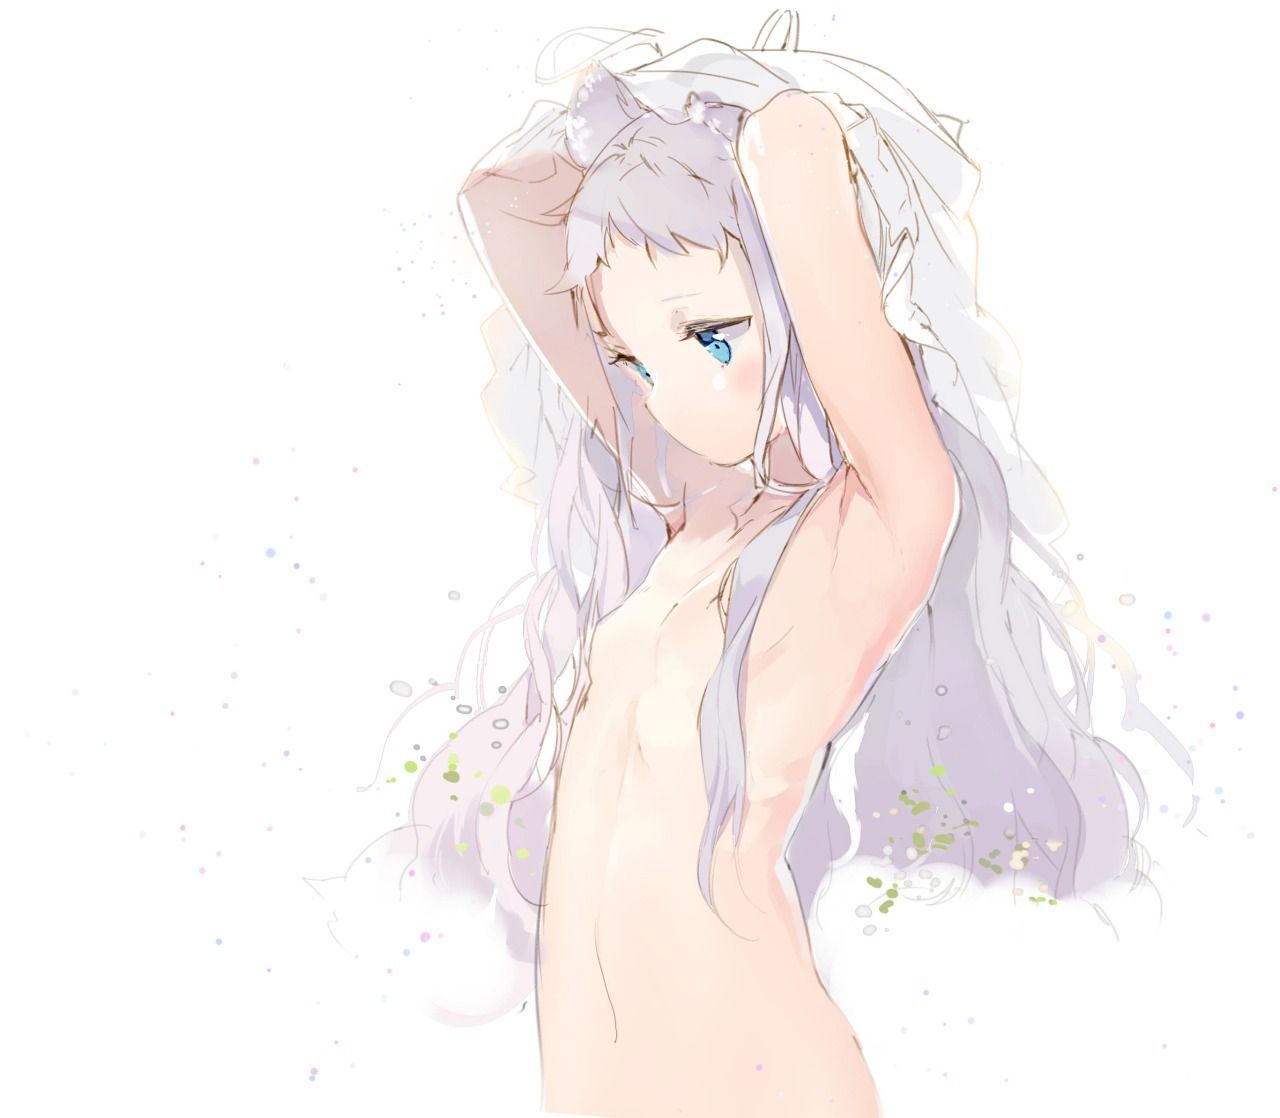 [2nd edition] Beautiful silver hair girl secondary erotic image Part 11 [Silver hair] 2